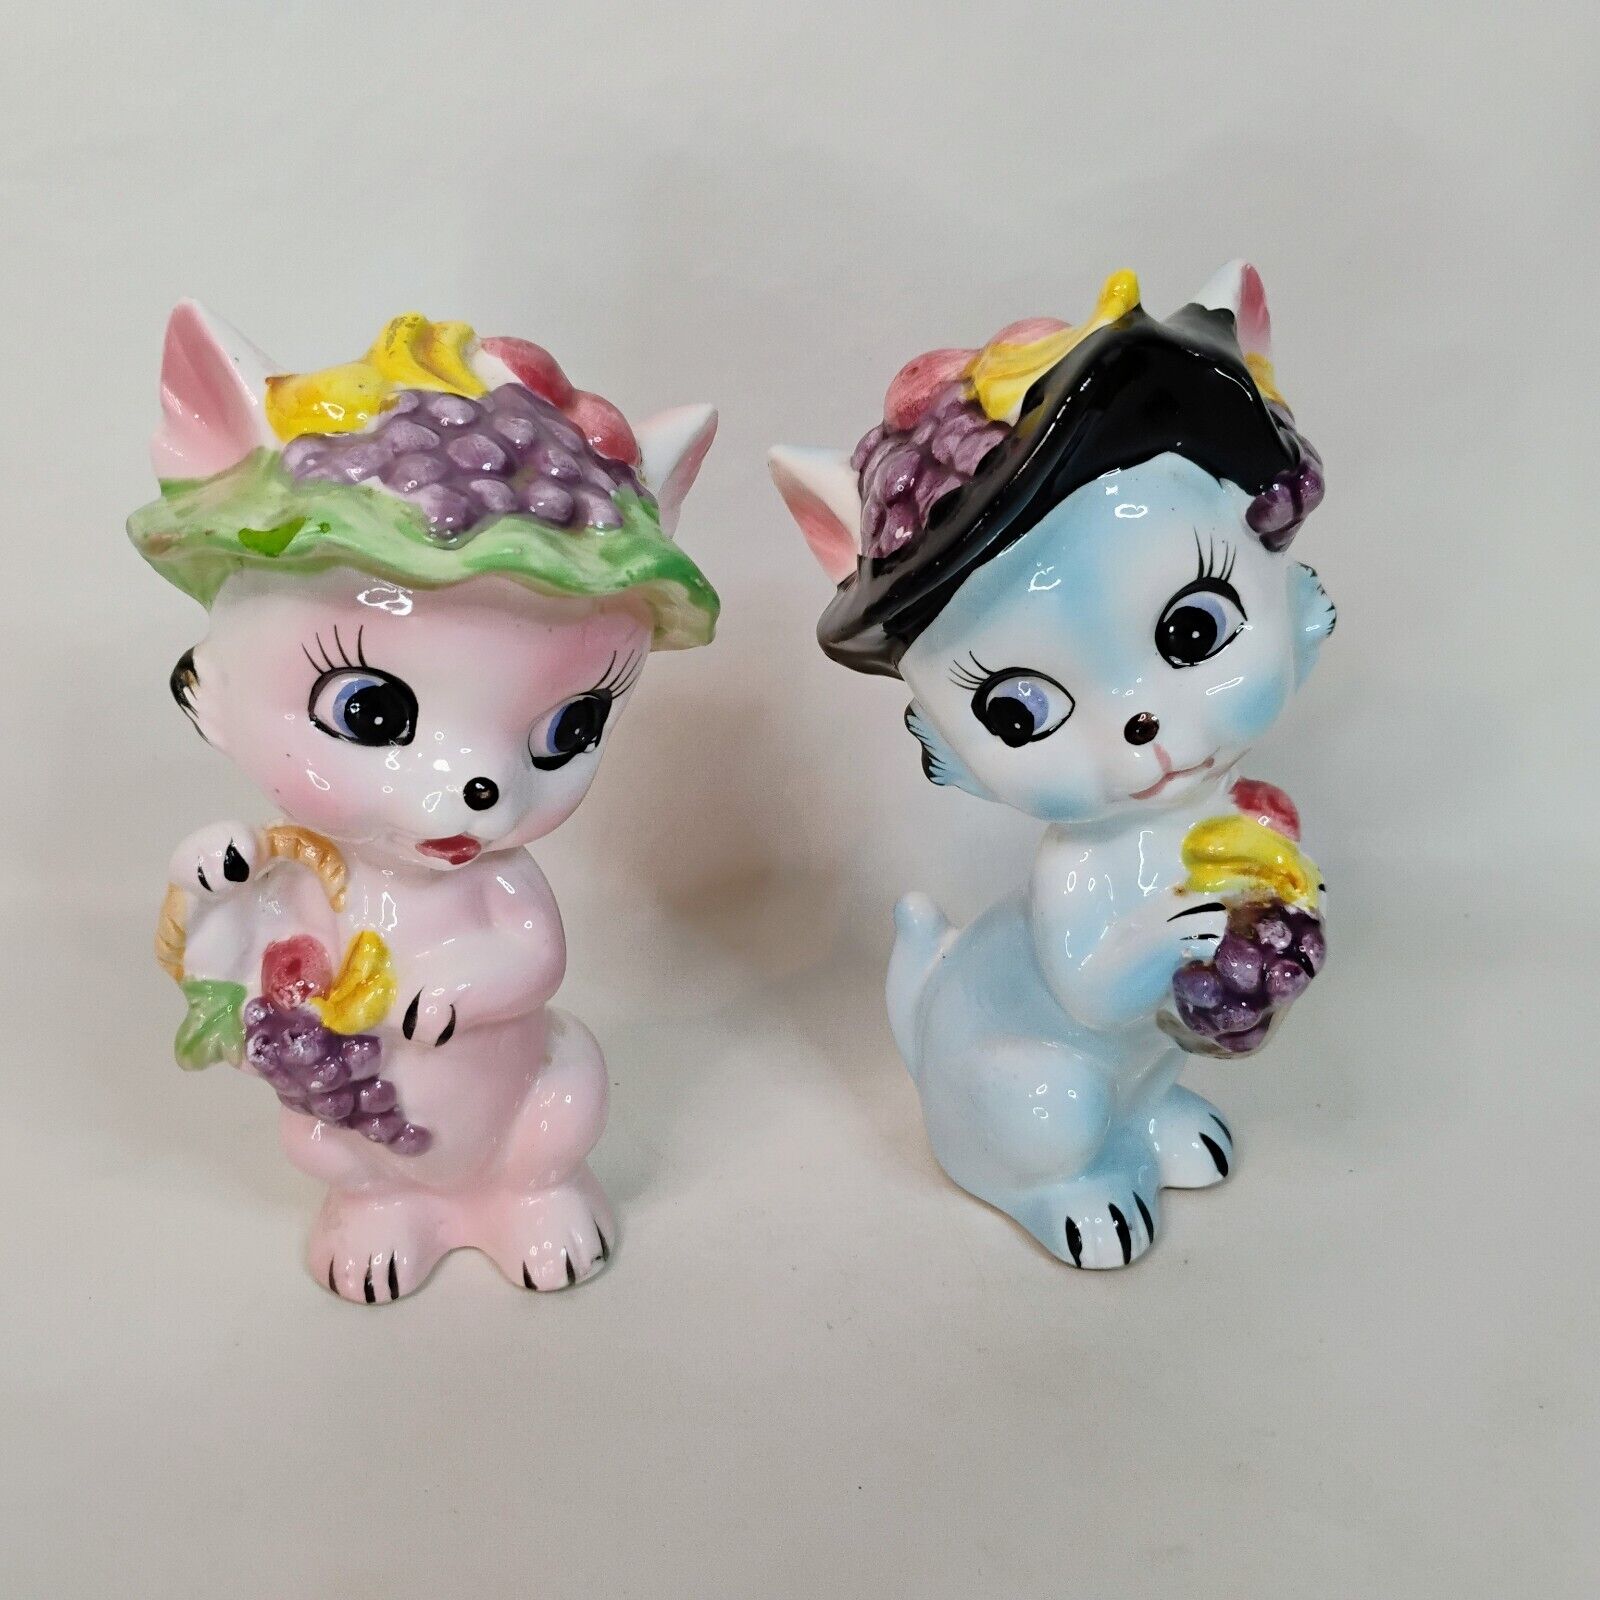 Vintage Mid Century Set Of Two Cat Figurines Pink And Blue 6.5 Inches Tall